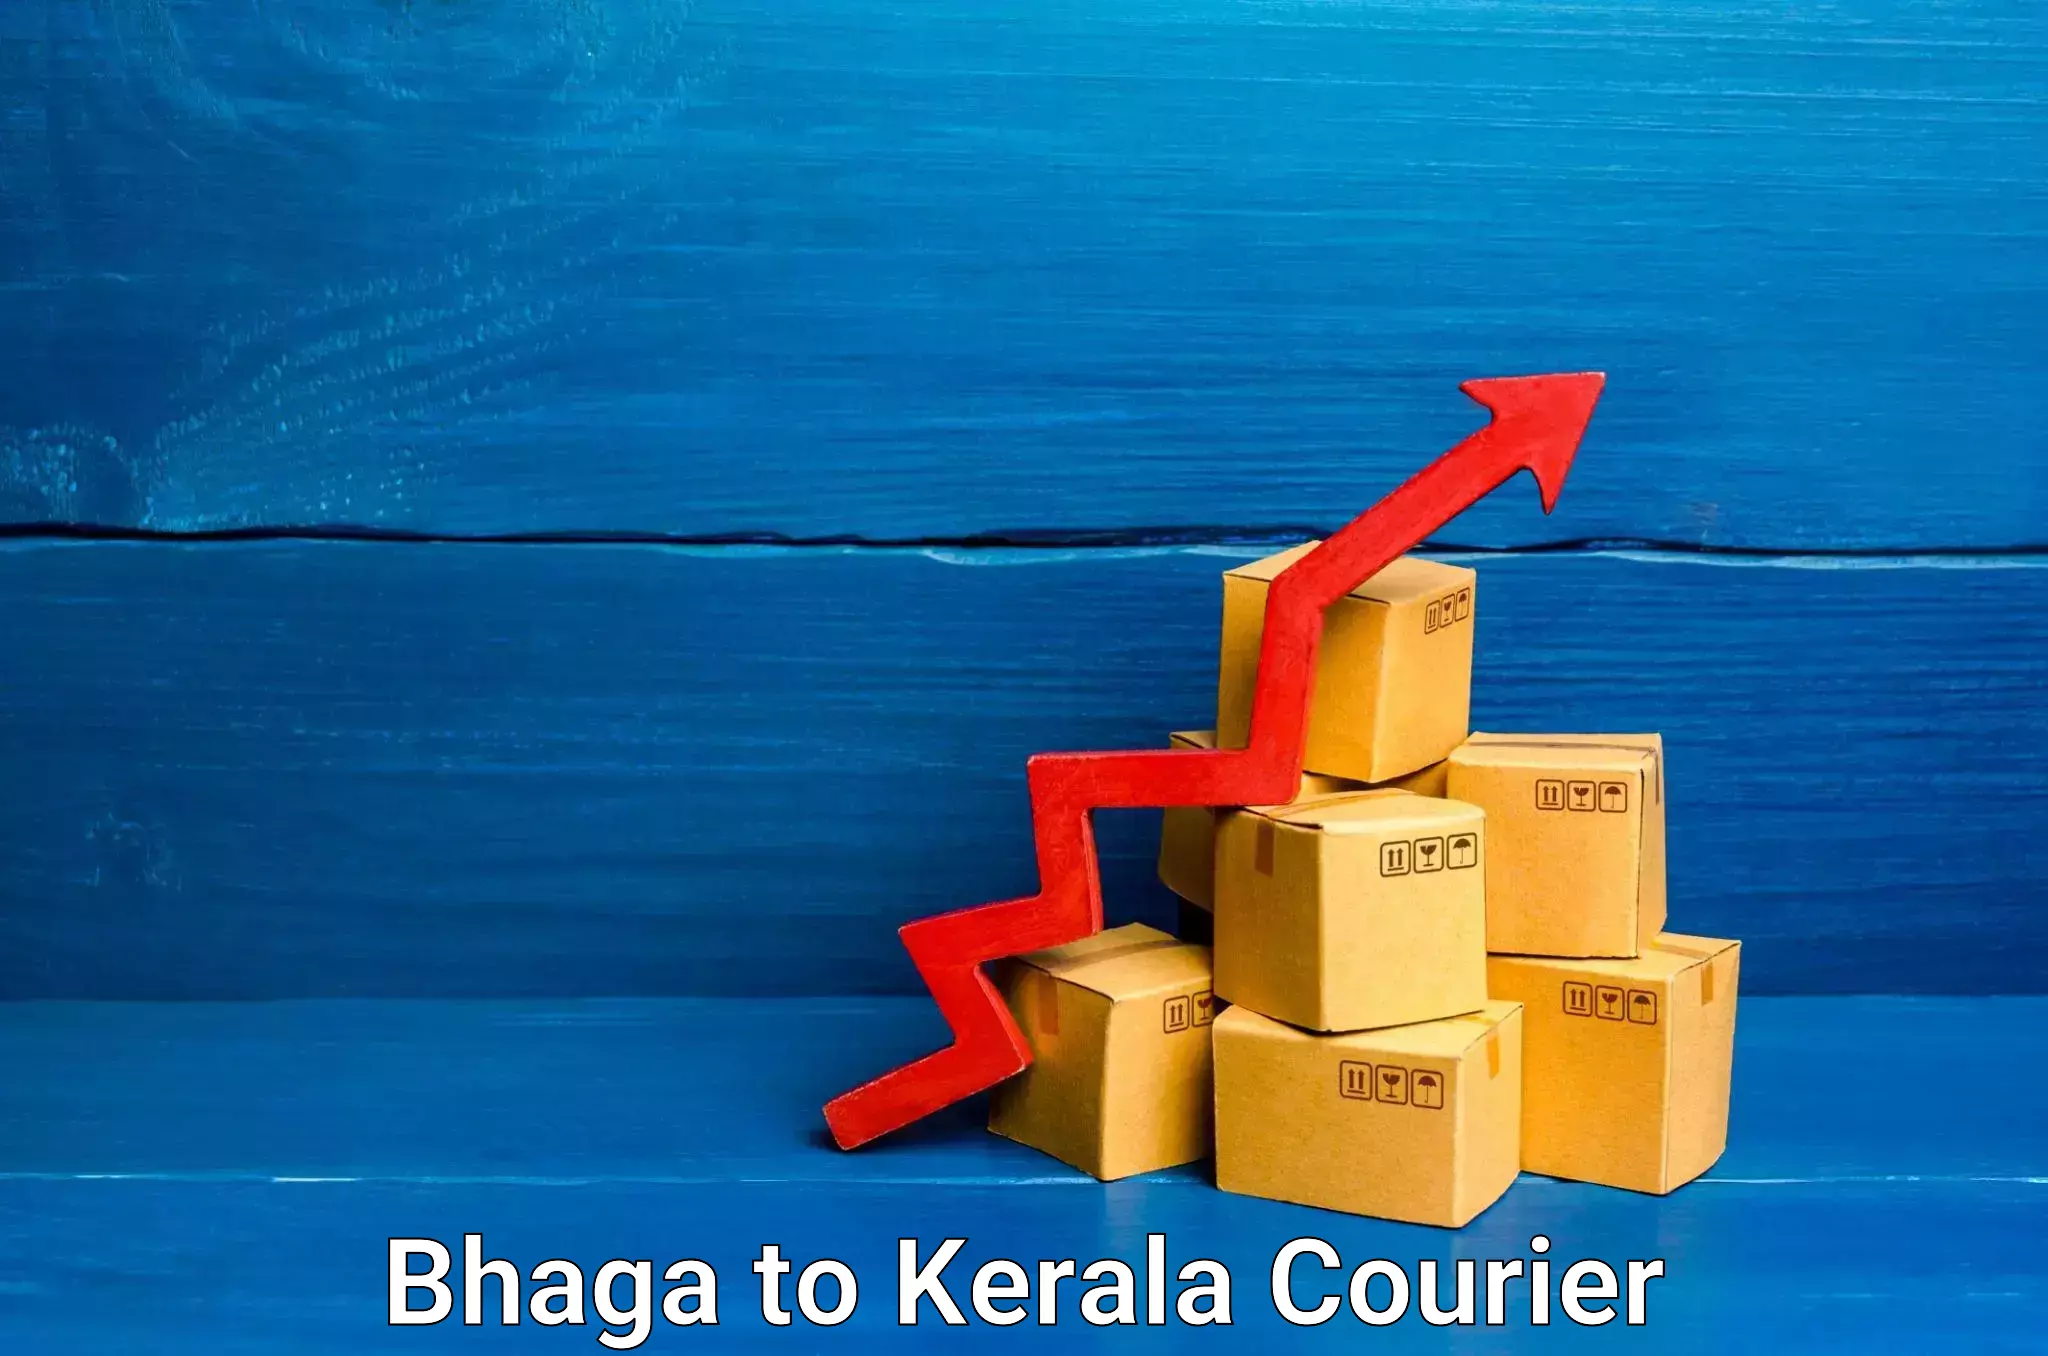 User-friendly delivery service Bhaga to Kerala